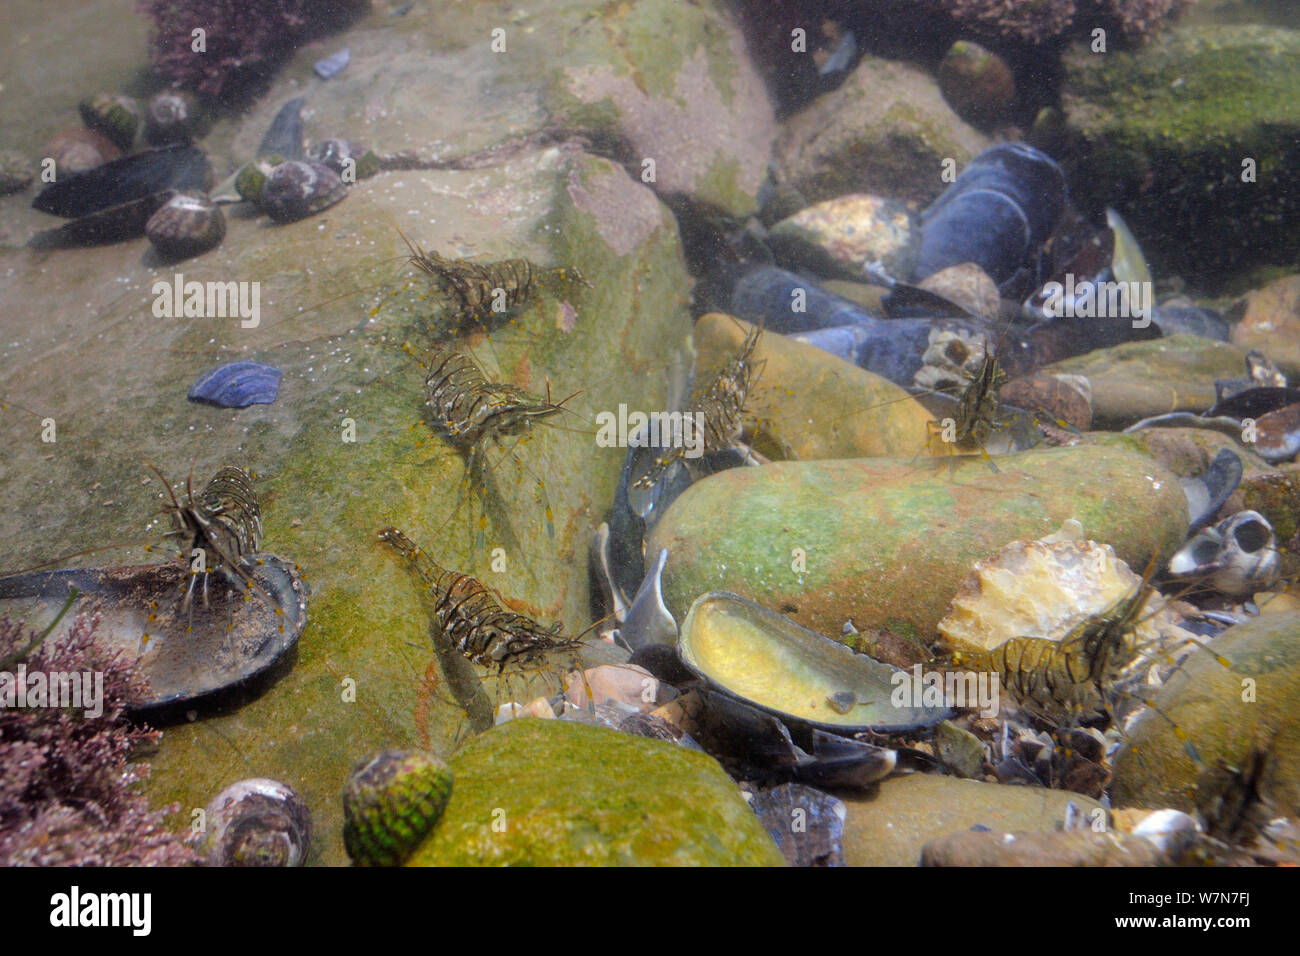 Group of Common prawns (Palaemon serratus) foraging among boulders and shell fragments in a rockpool. Rhossili, The Gower Peninsula, UK, July. Stock Photo